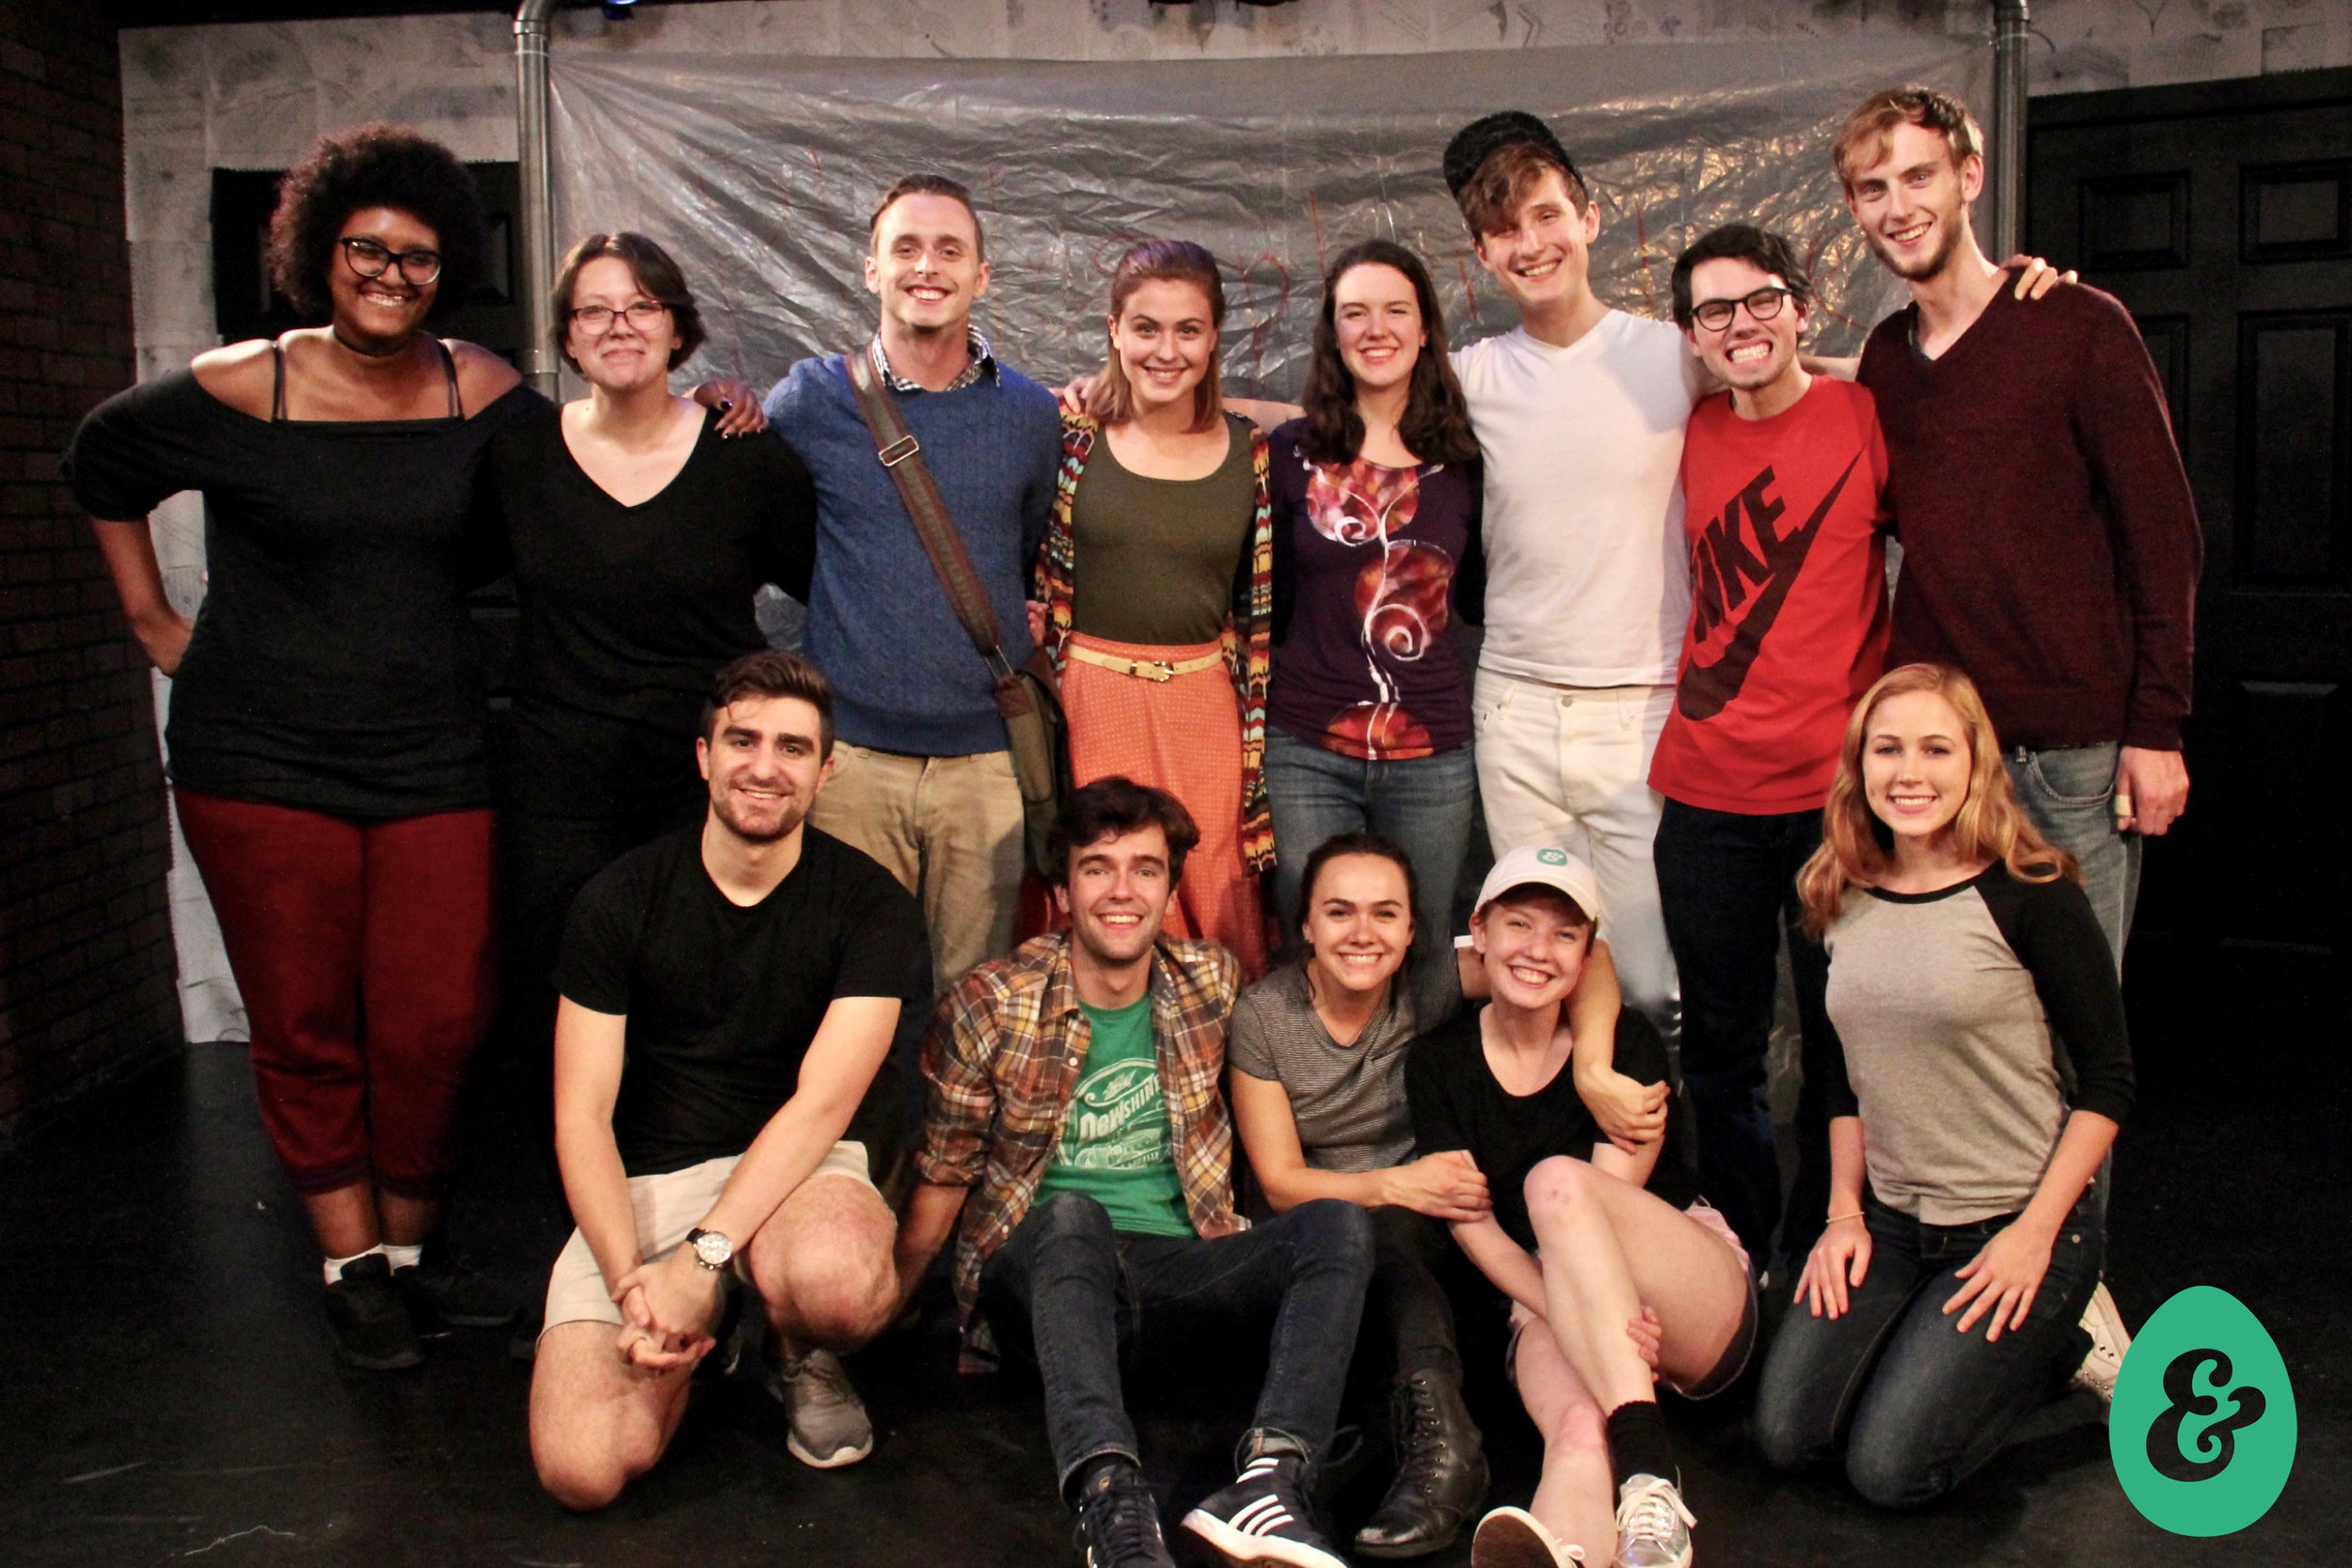  Cast and Production Team of MORNING  Behind (from L): Jessica Crawford, Yve Carruthers, Julián Garnik, Sam Phillips, Jesse O'Brien, Pascal Portney, Liam Lonegan, Greg Folsom  Front (from L): James Scarola, Alex Griffin, Bryn Dolan, Catherine Gidding